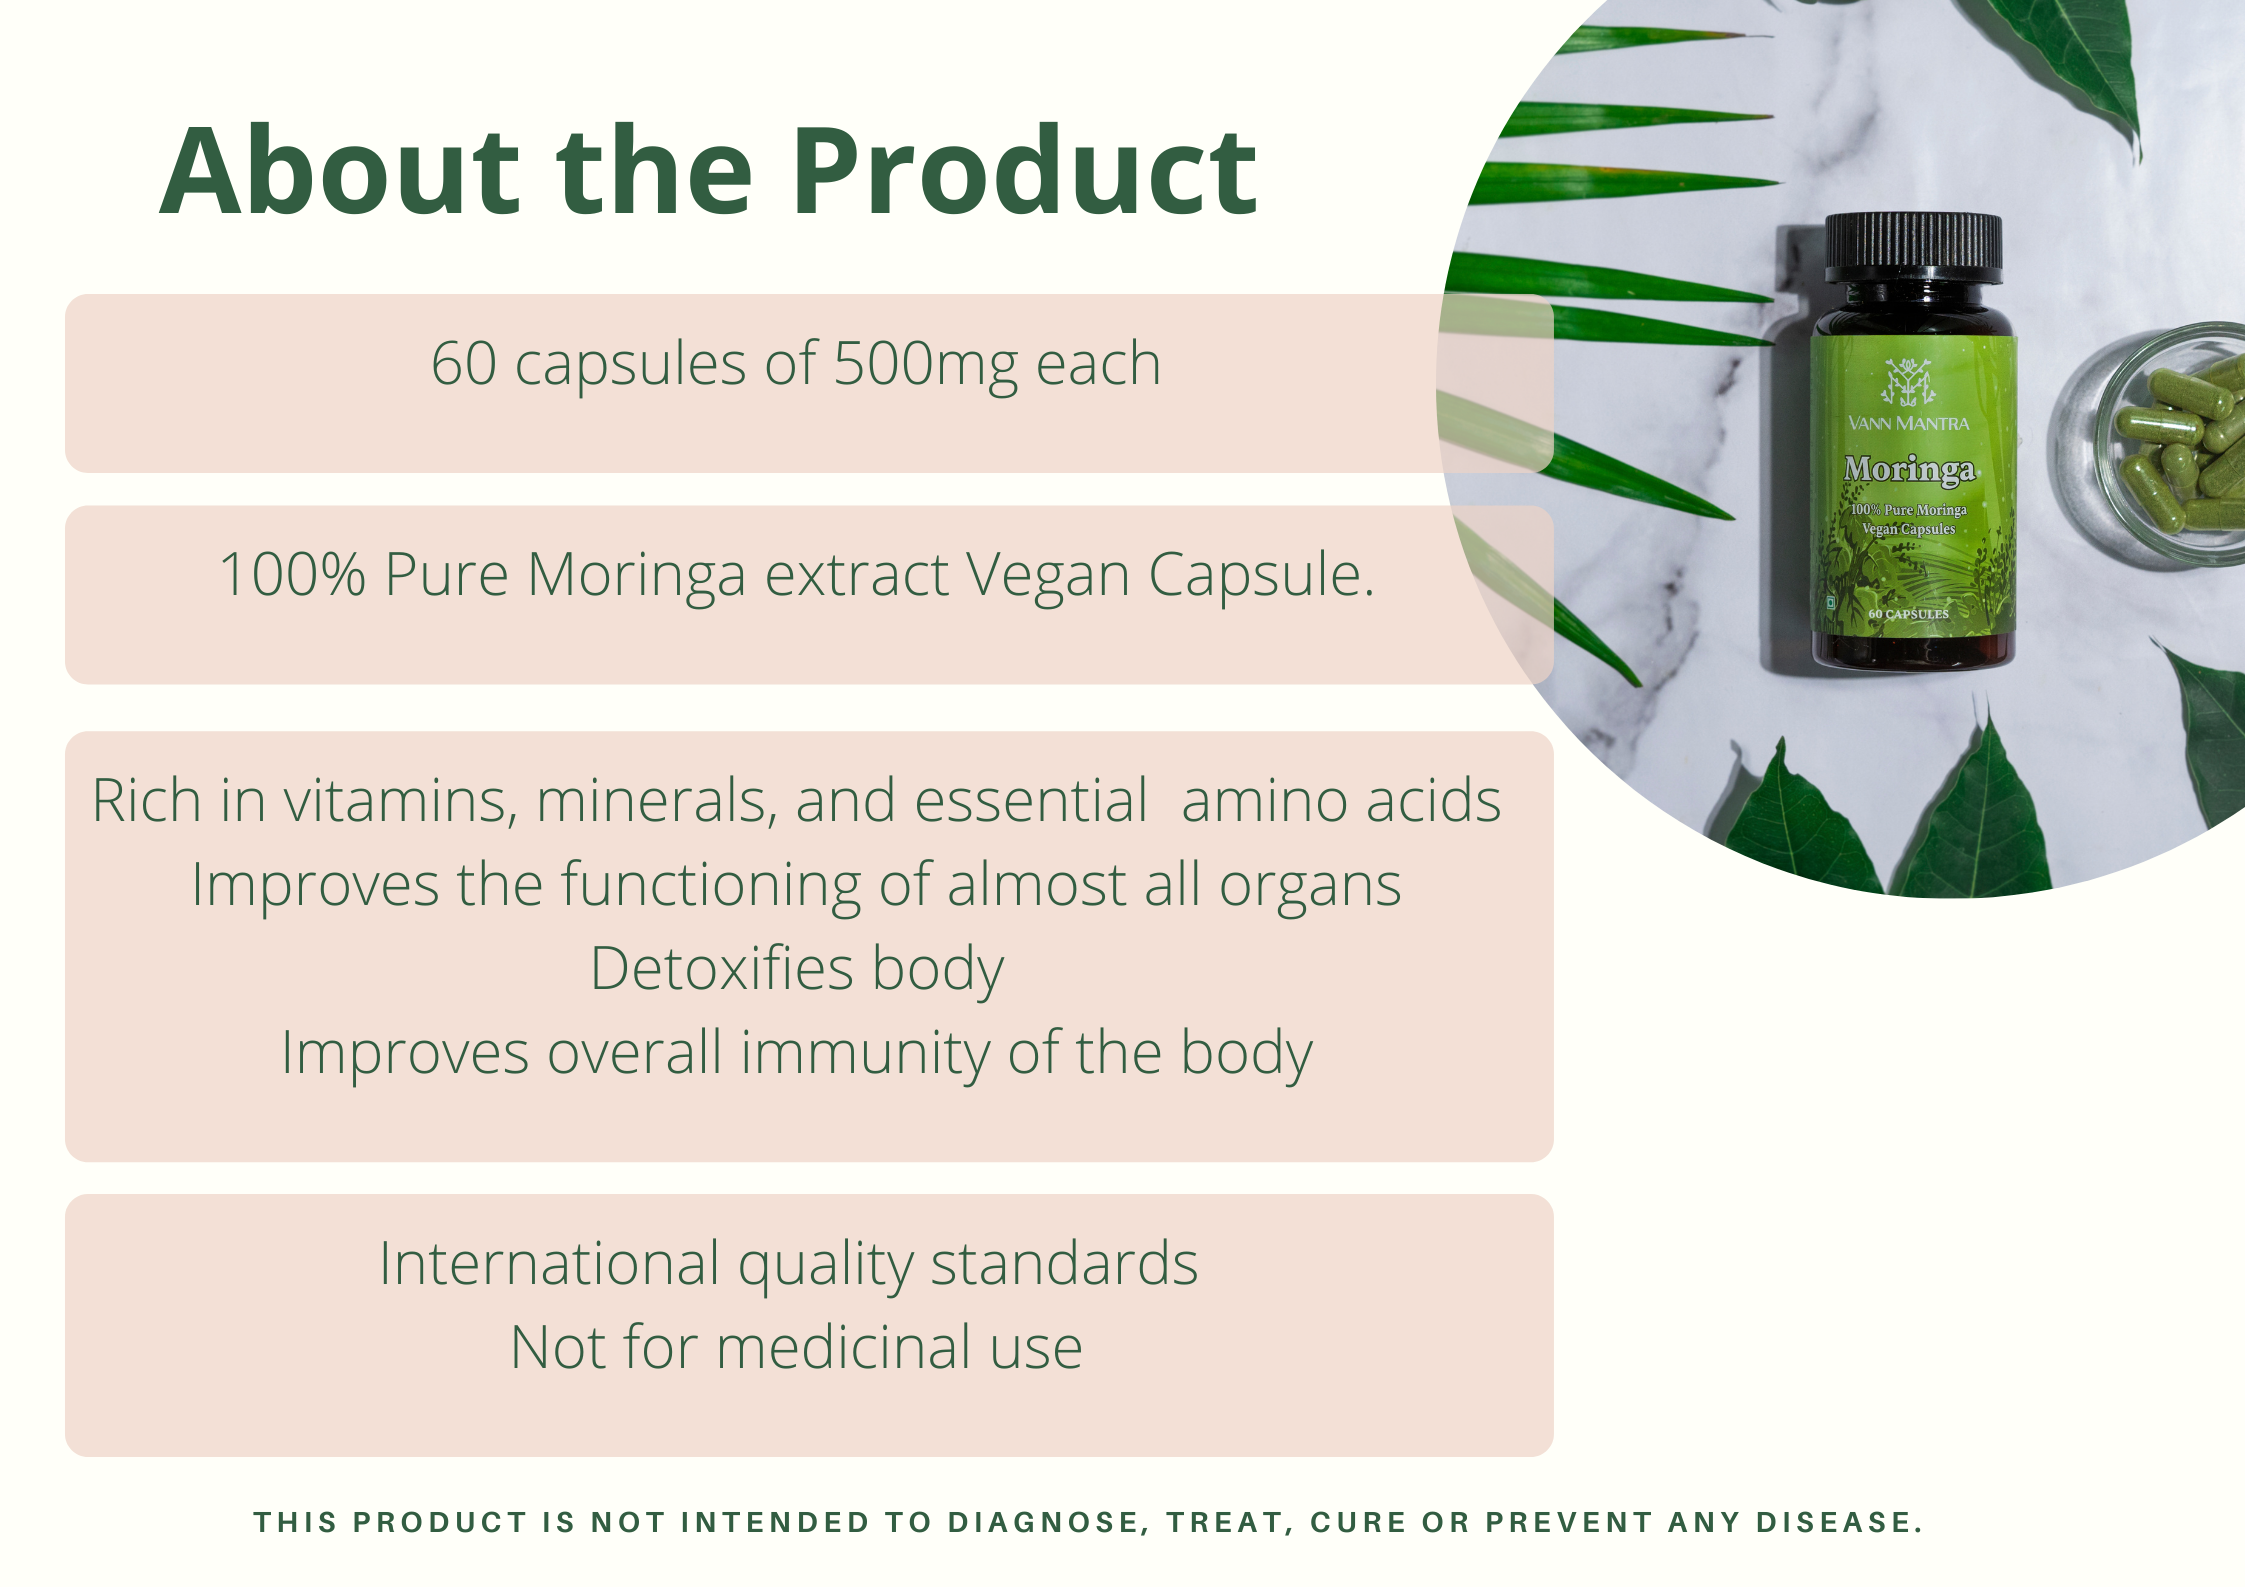 Infographic explaining the features and benefits of Moringa Capsules.